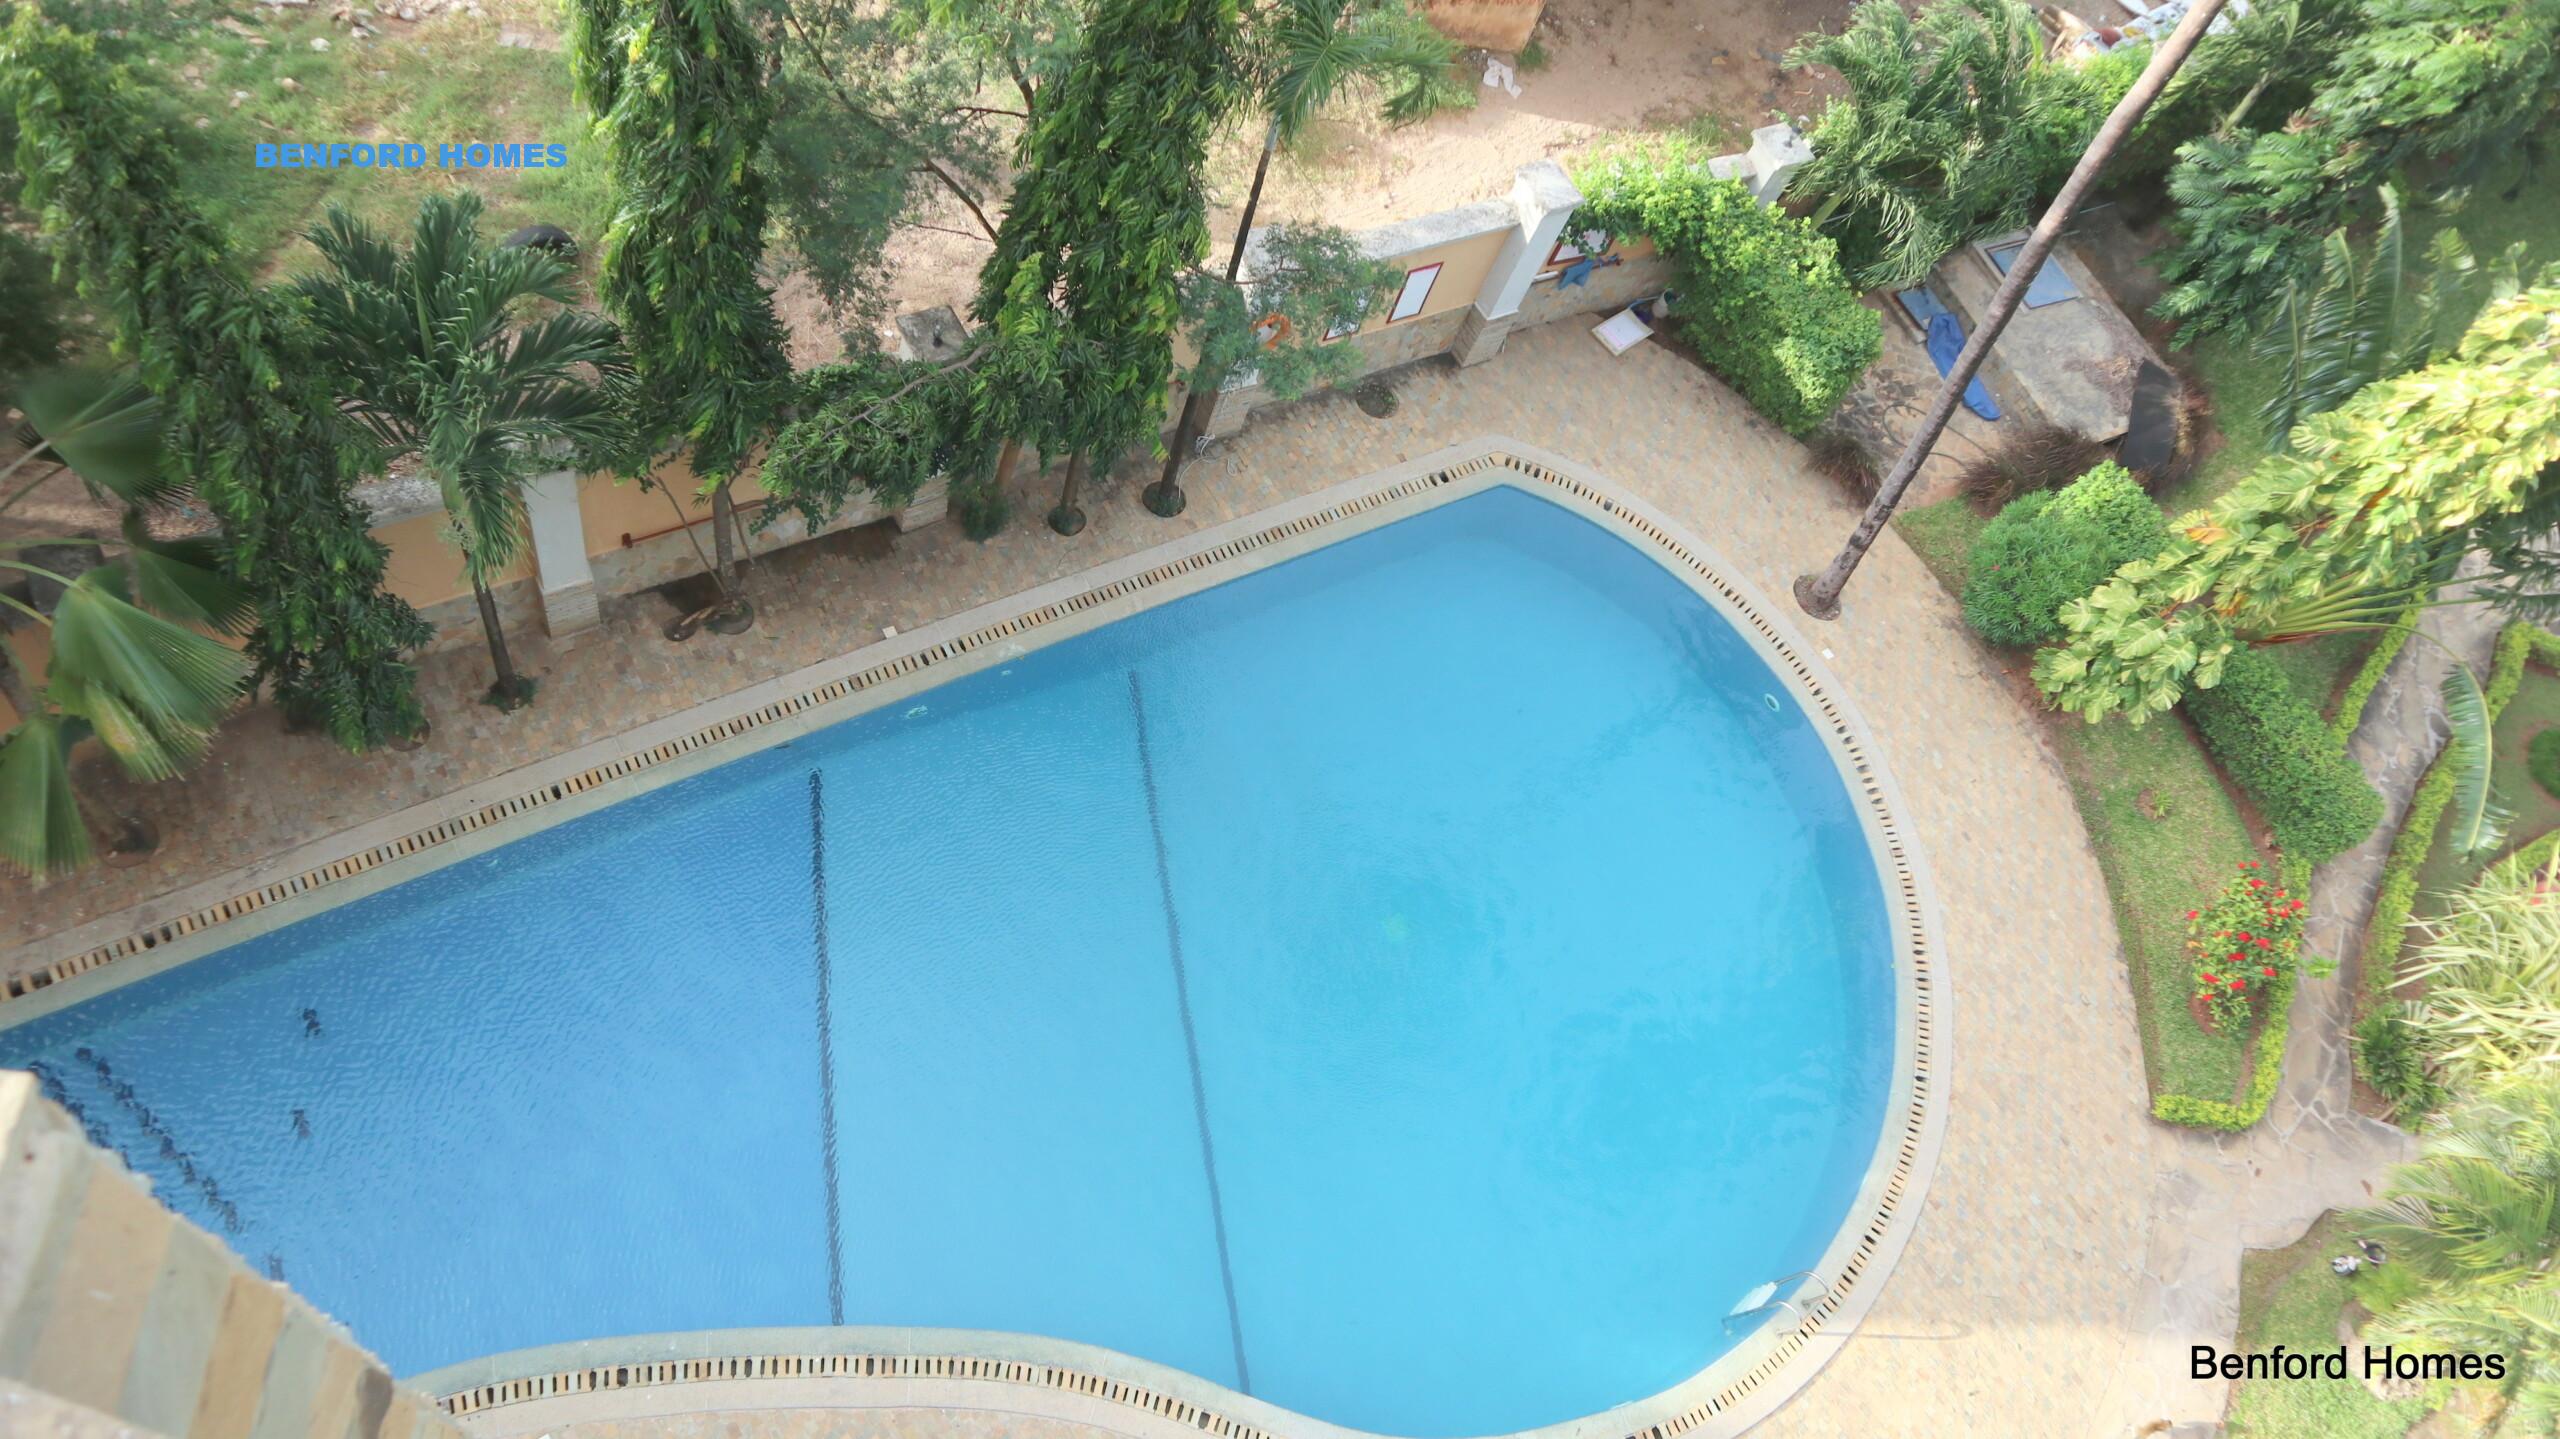 P-shaped swimming pool with tree lined compound and high rise apartments| Benford Homes